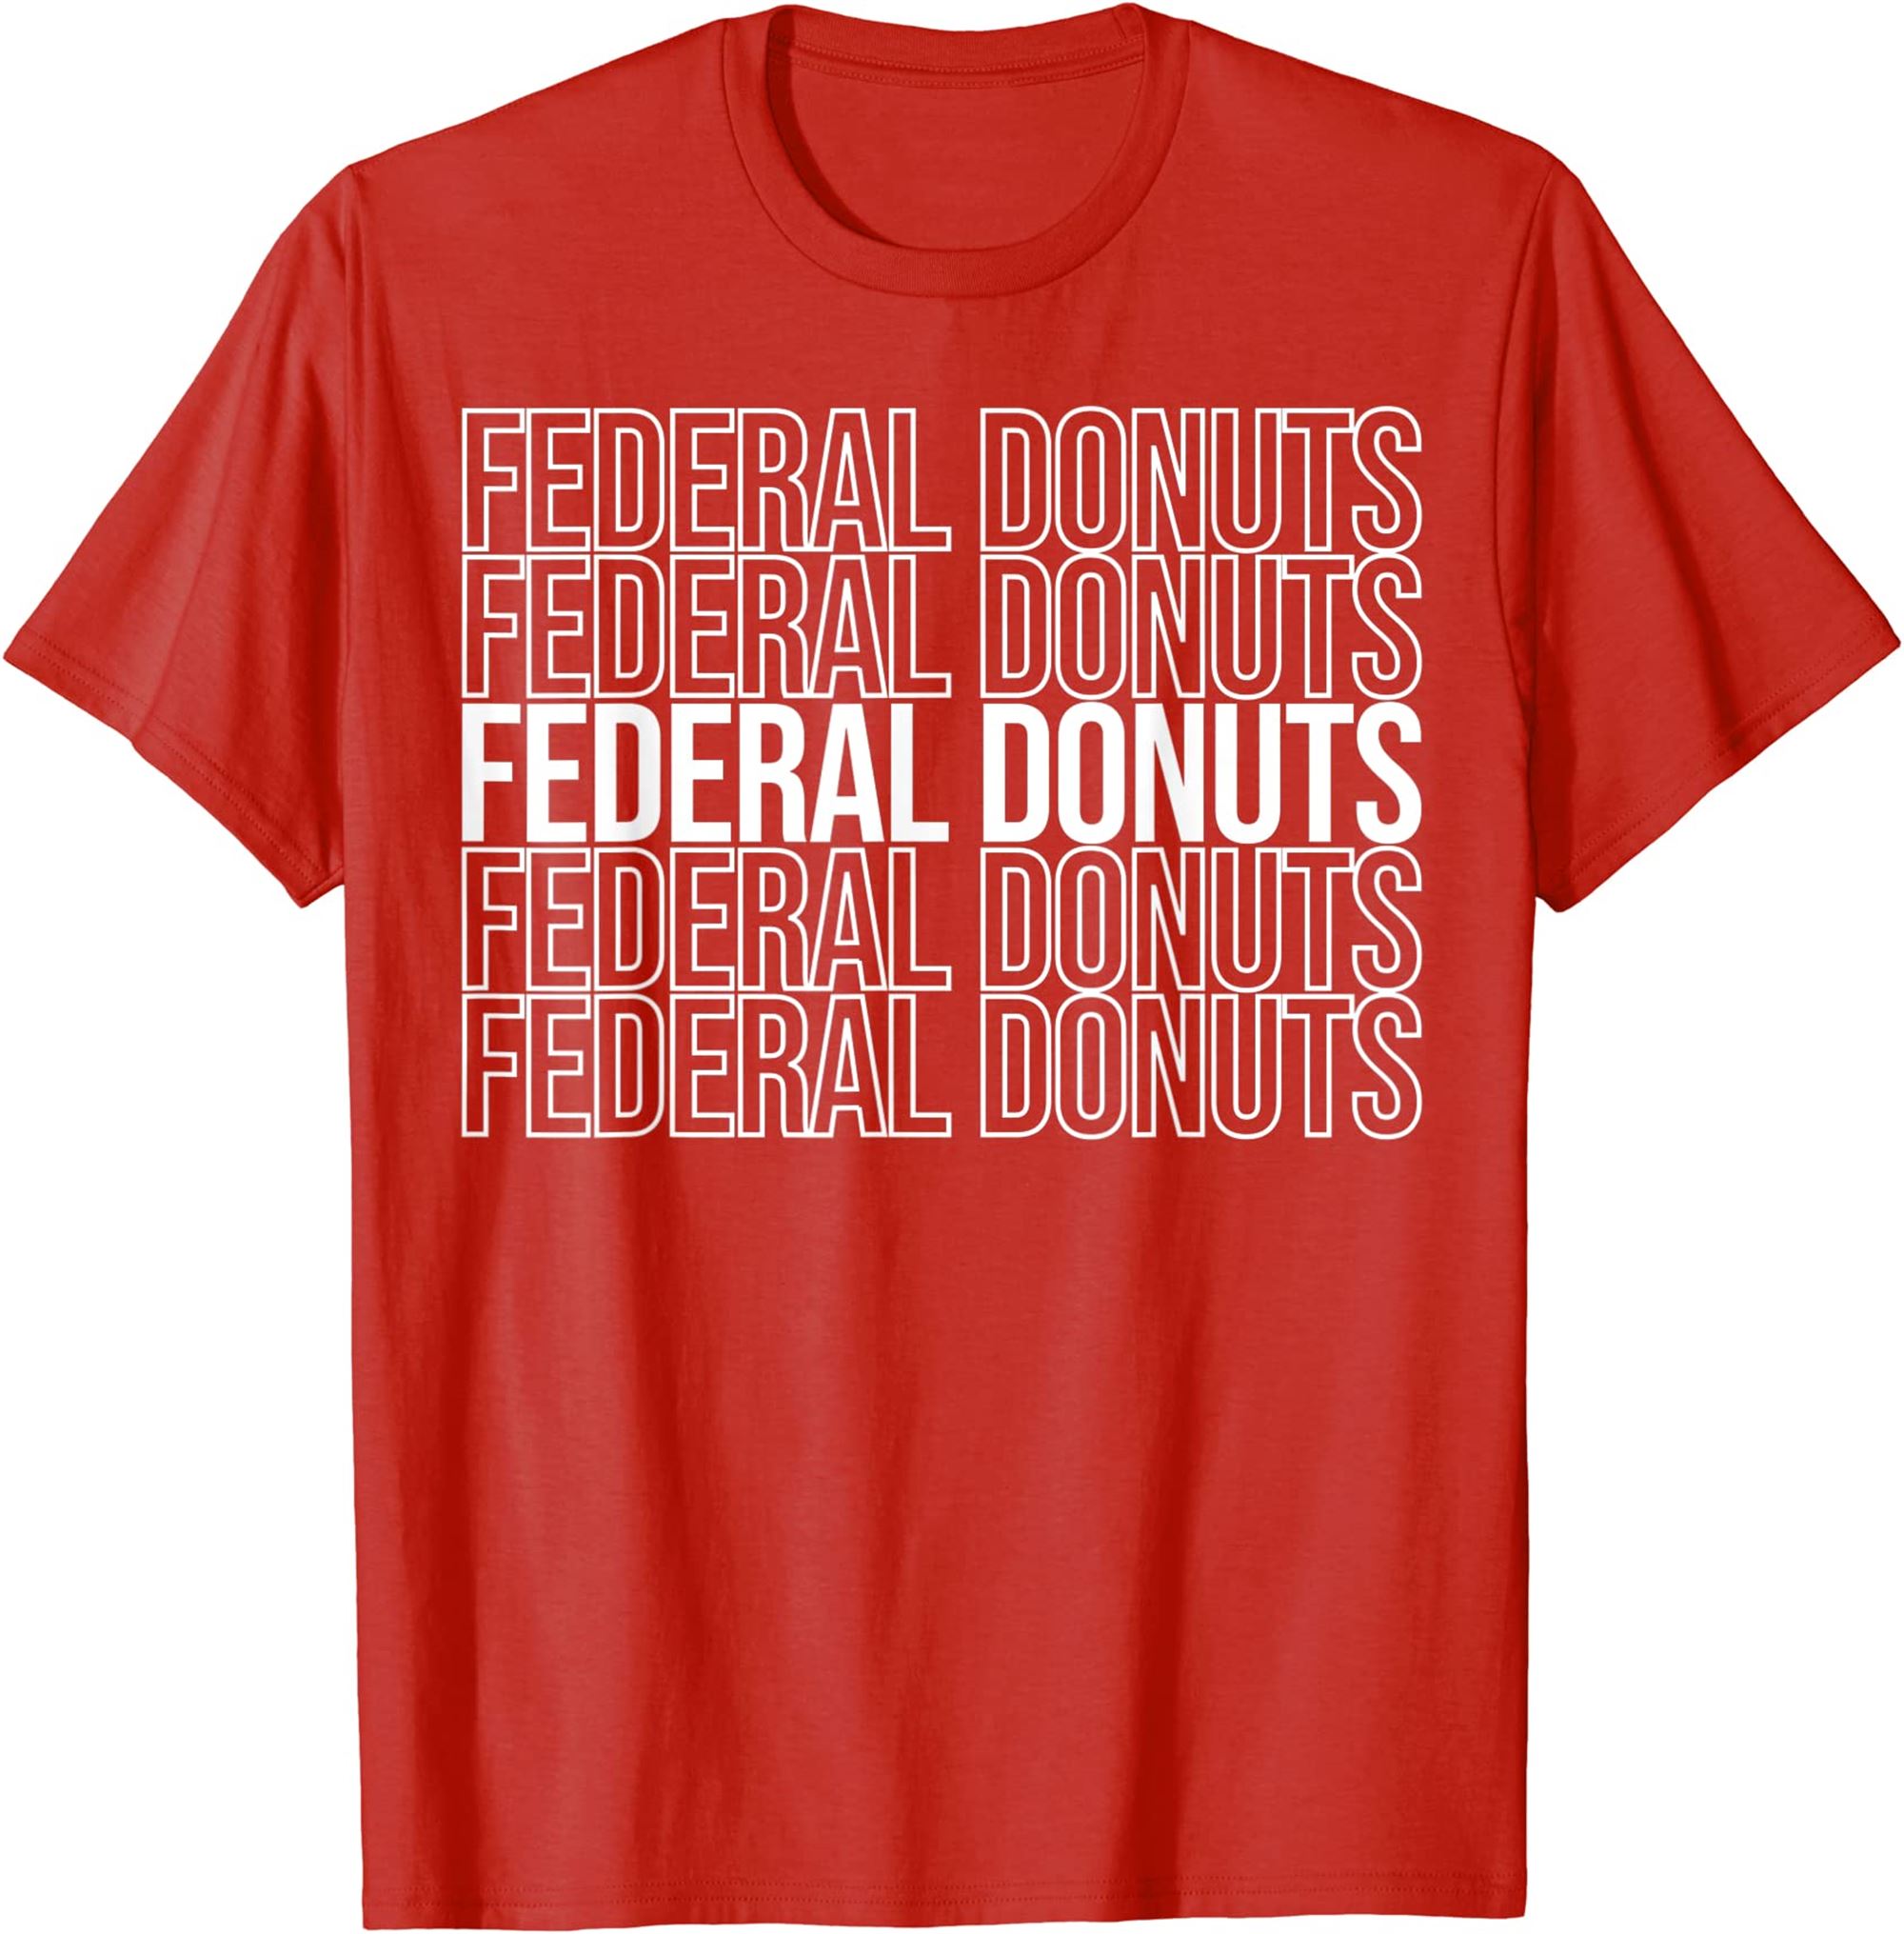 Federal Donuts T-shirt Size Up To 5xl